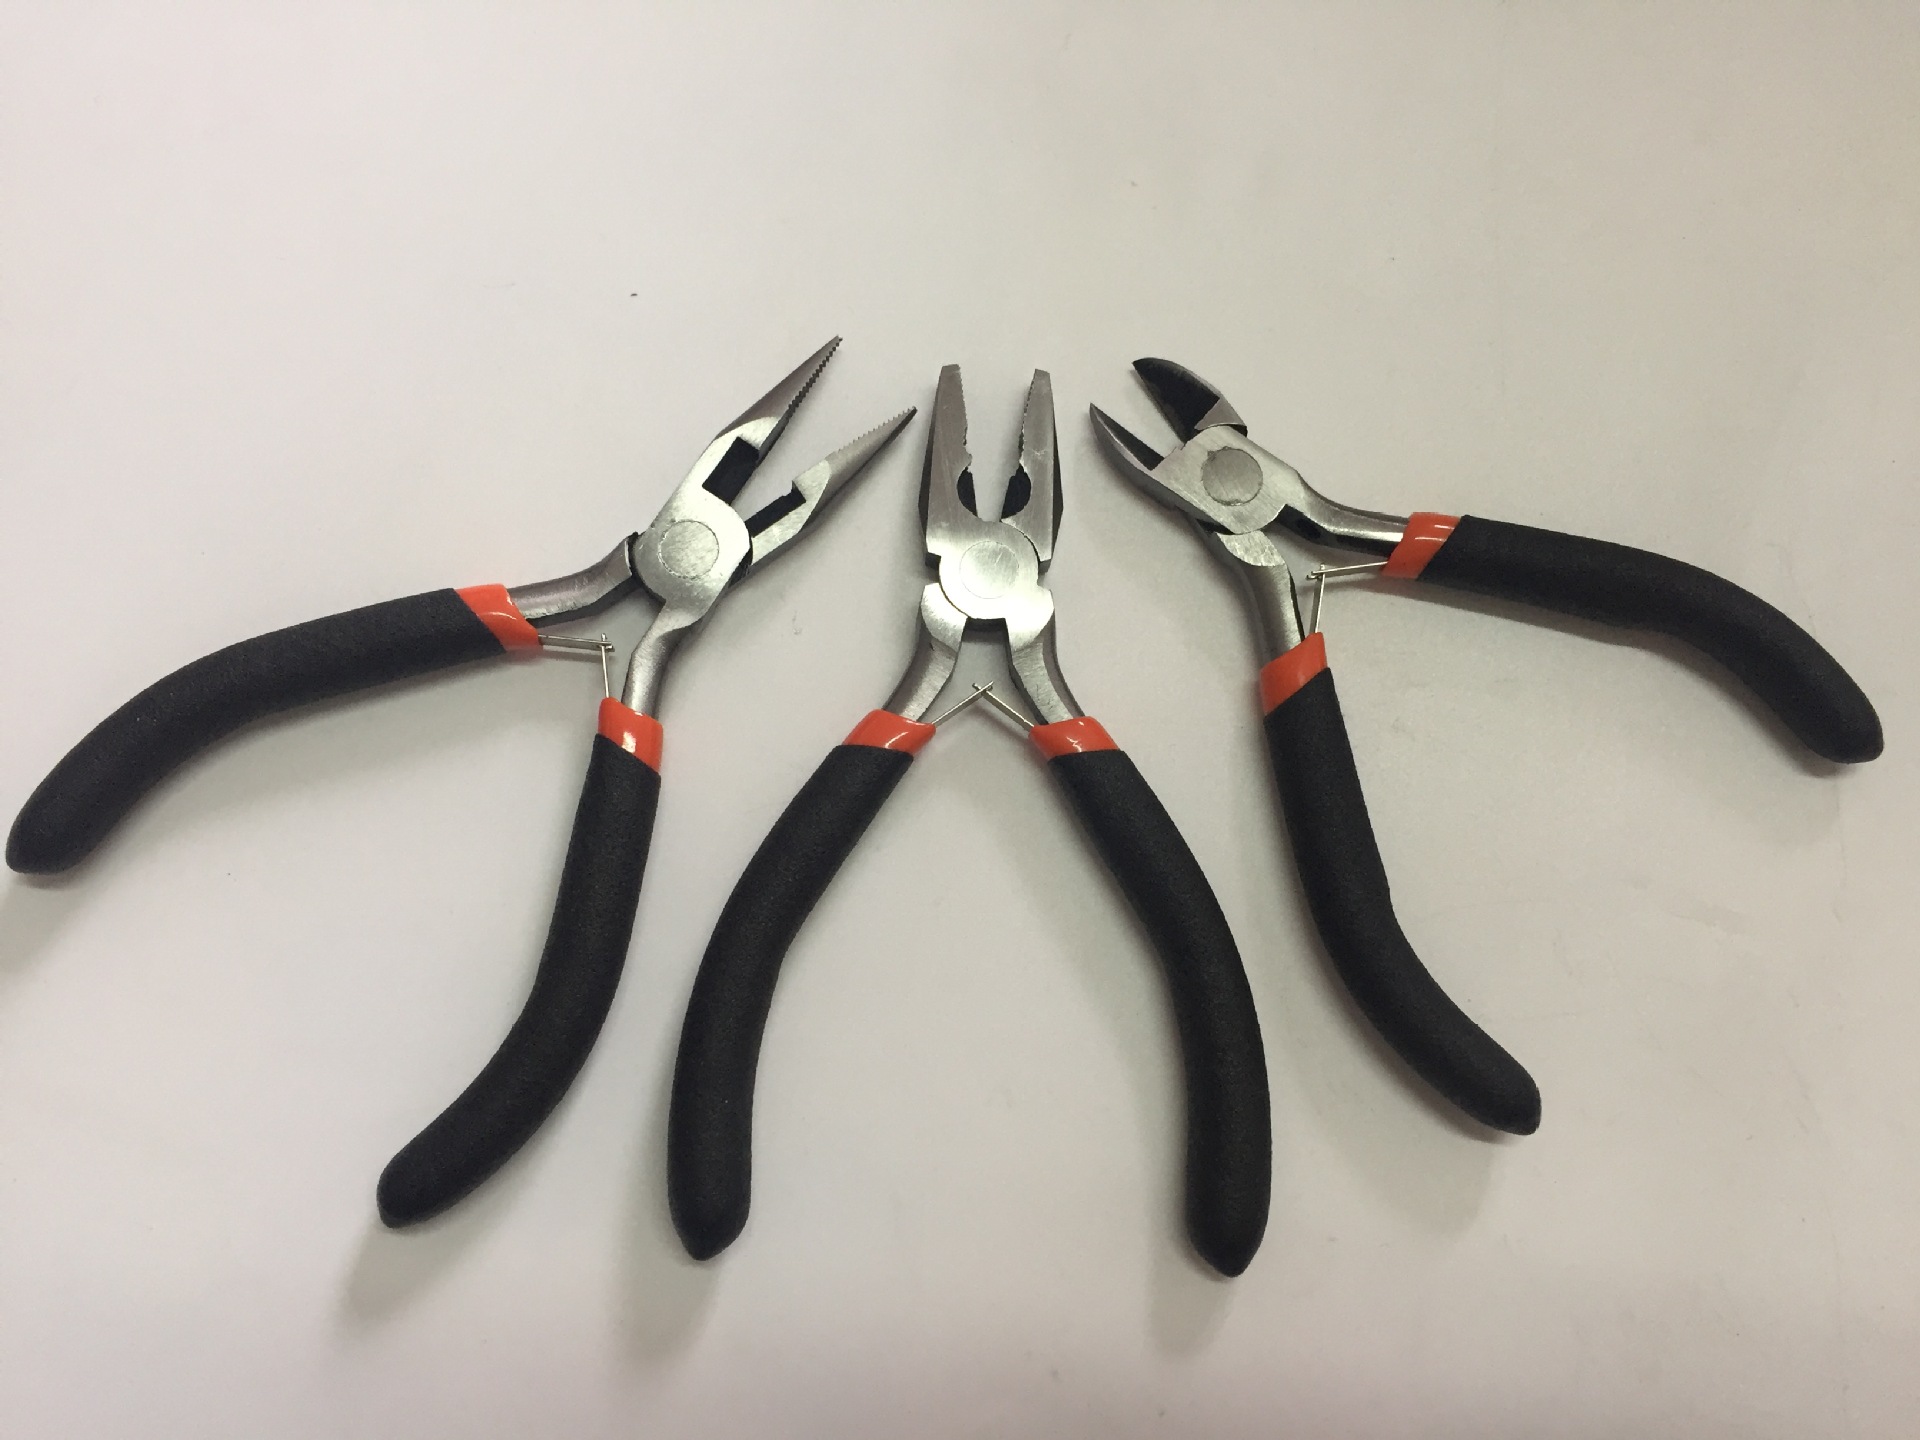 4.5 Inch 125mm Needle-nose Mini Pliers